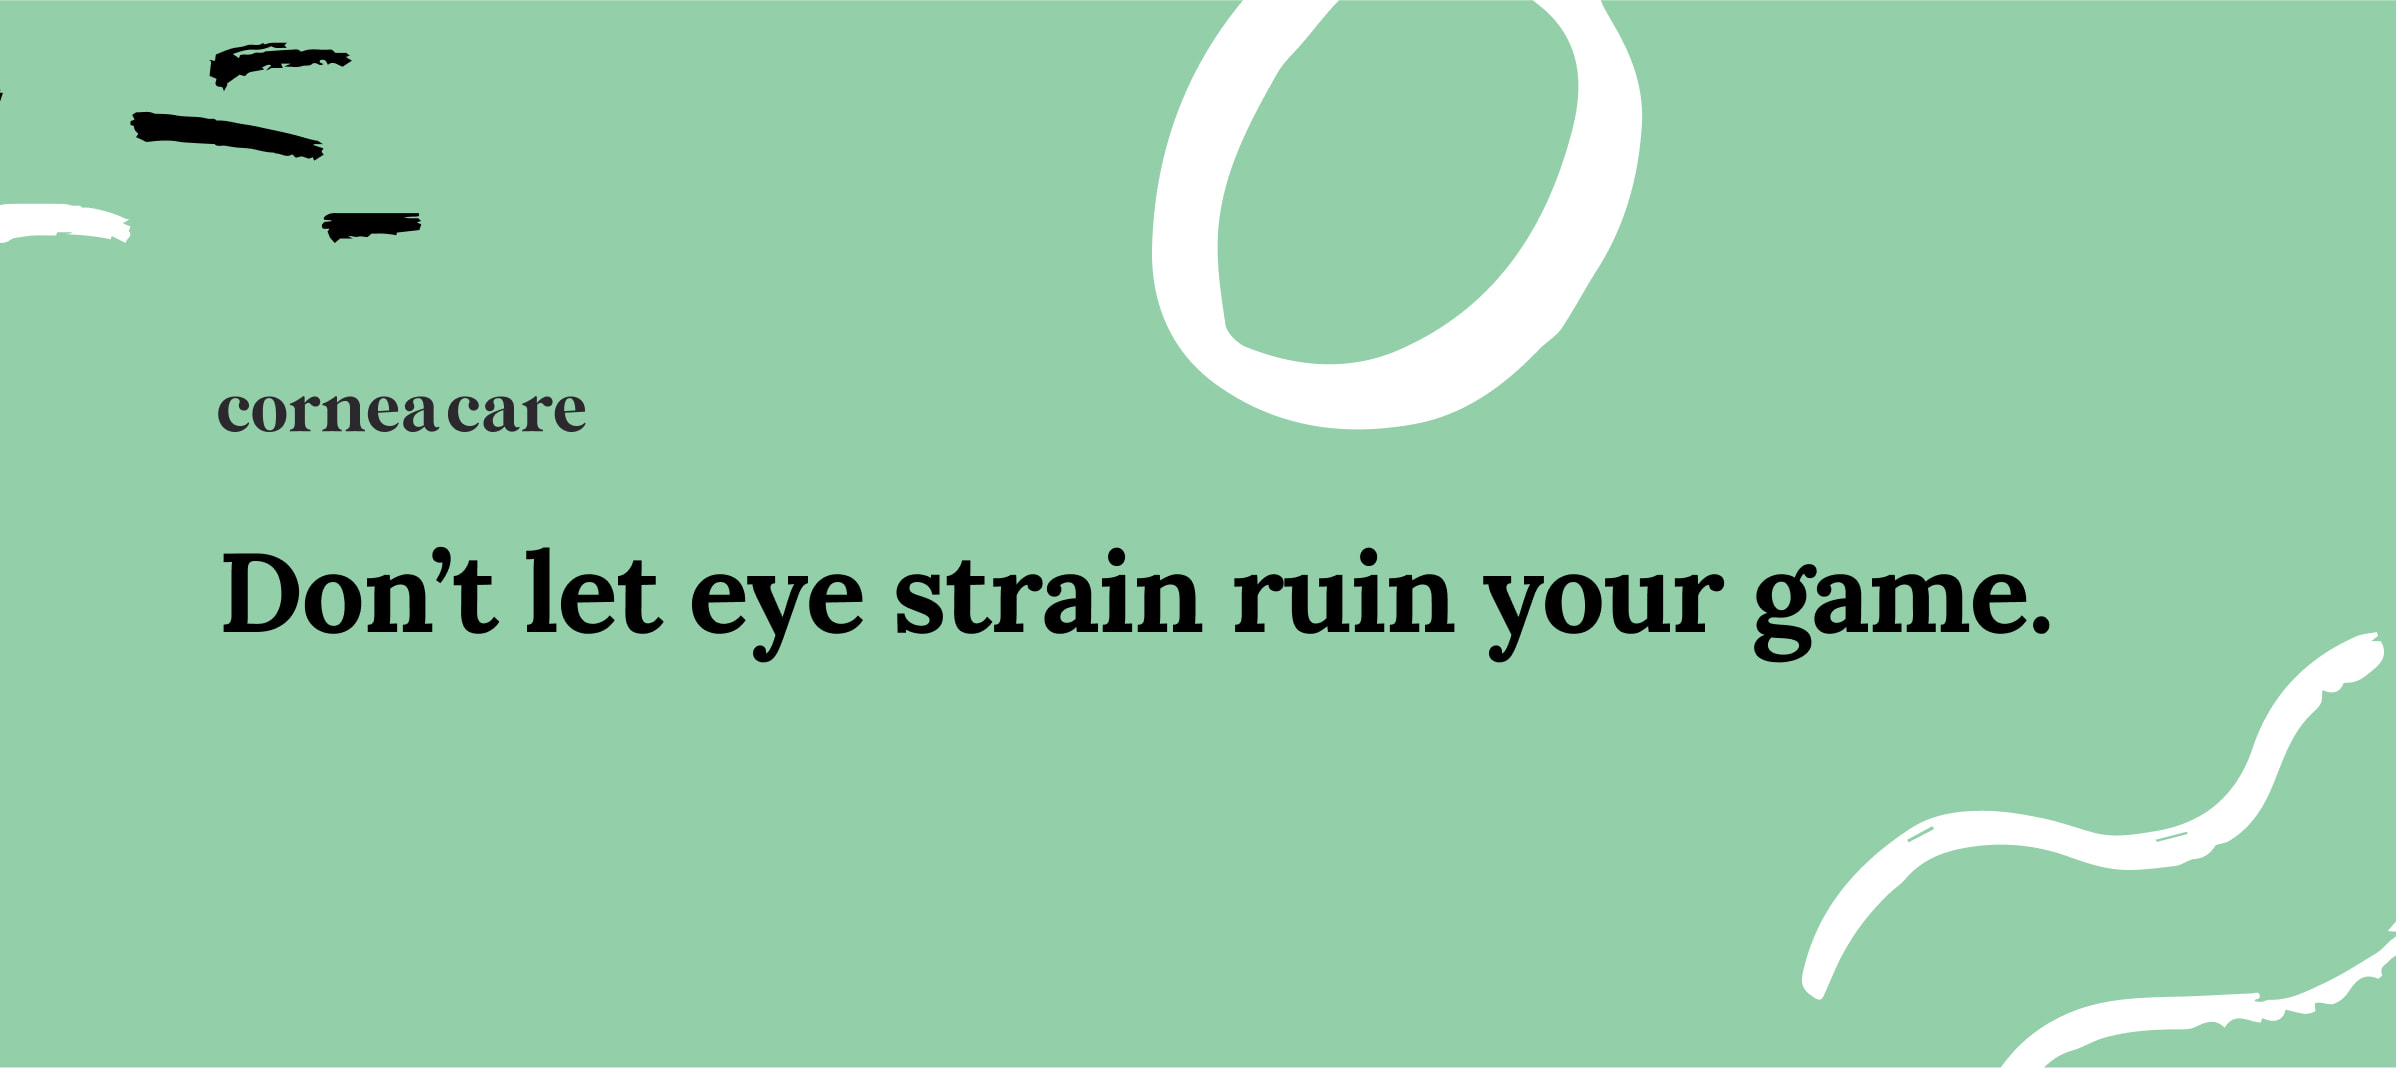 5 Tips on How to Reduce Eye Strain While Gaming